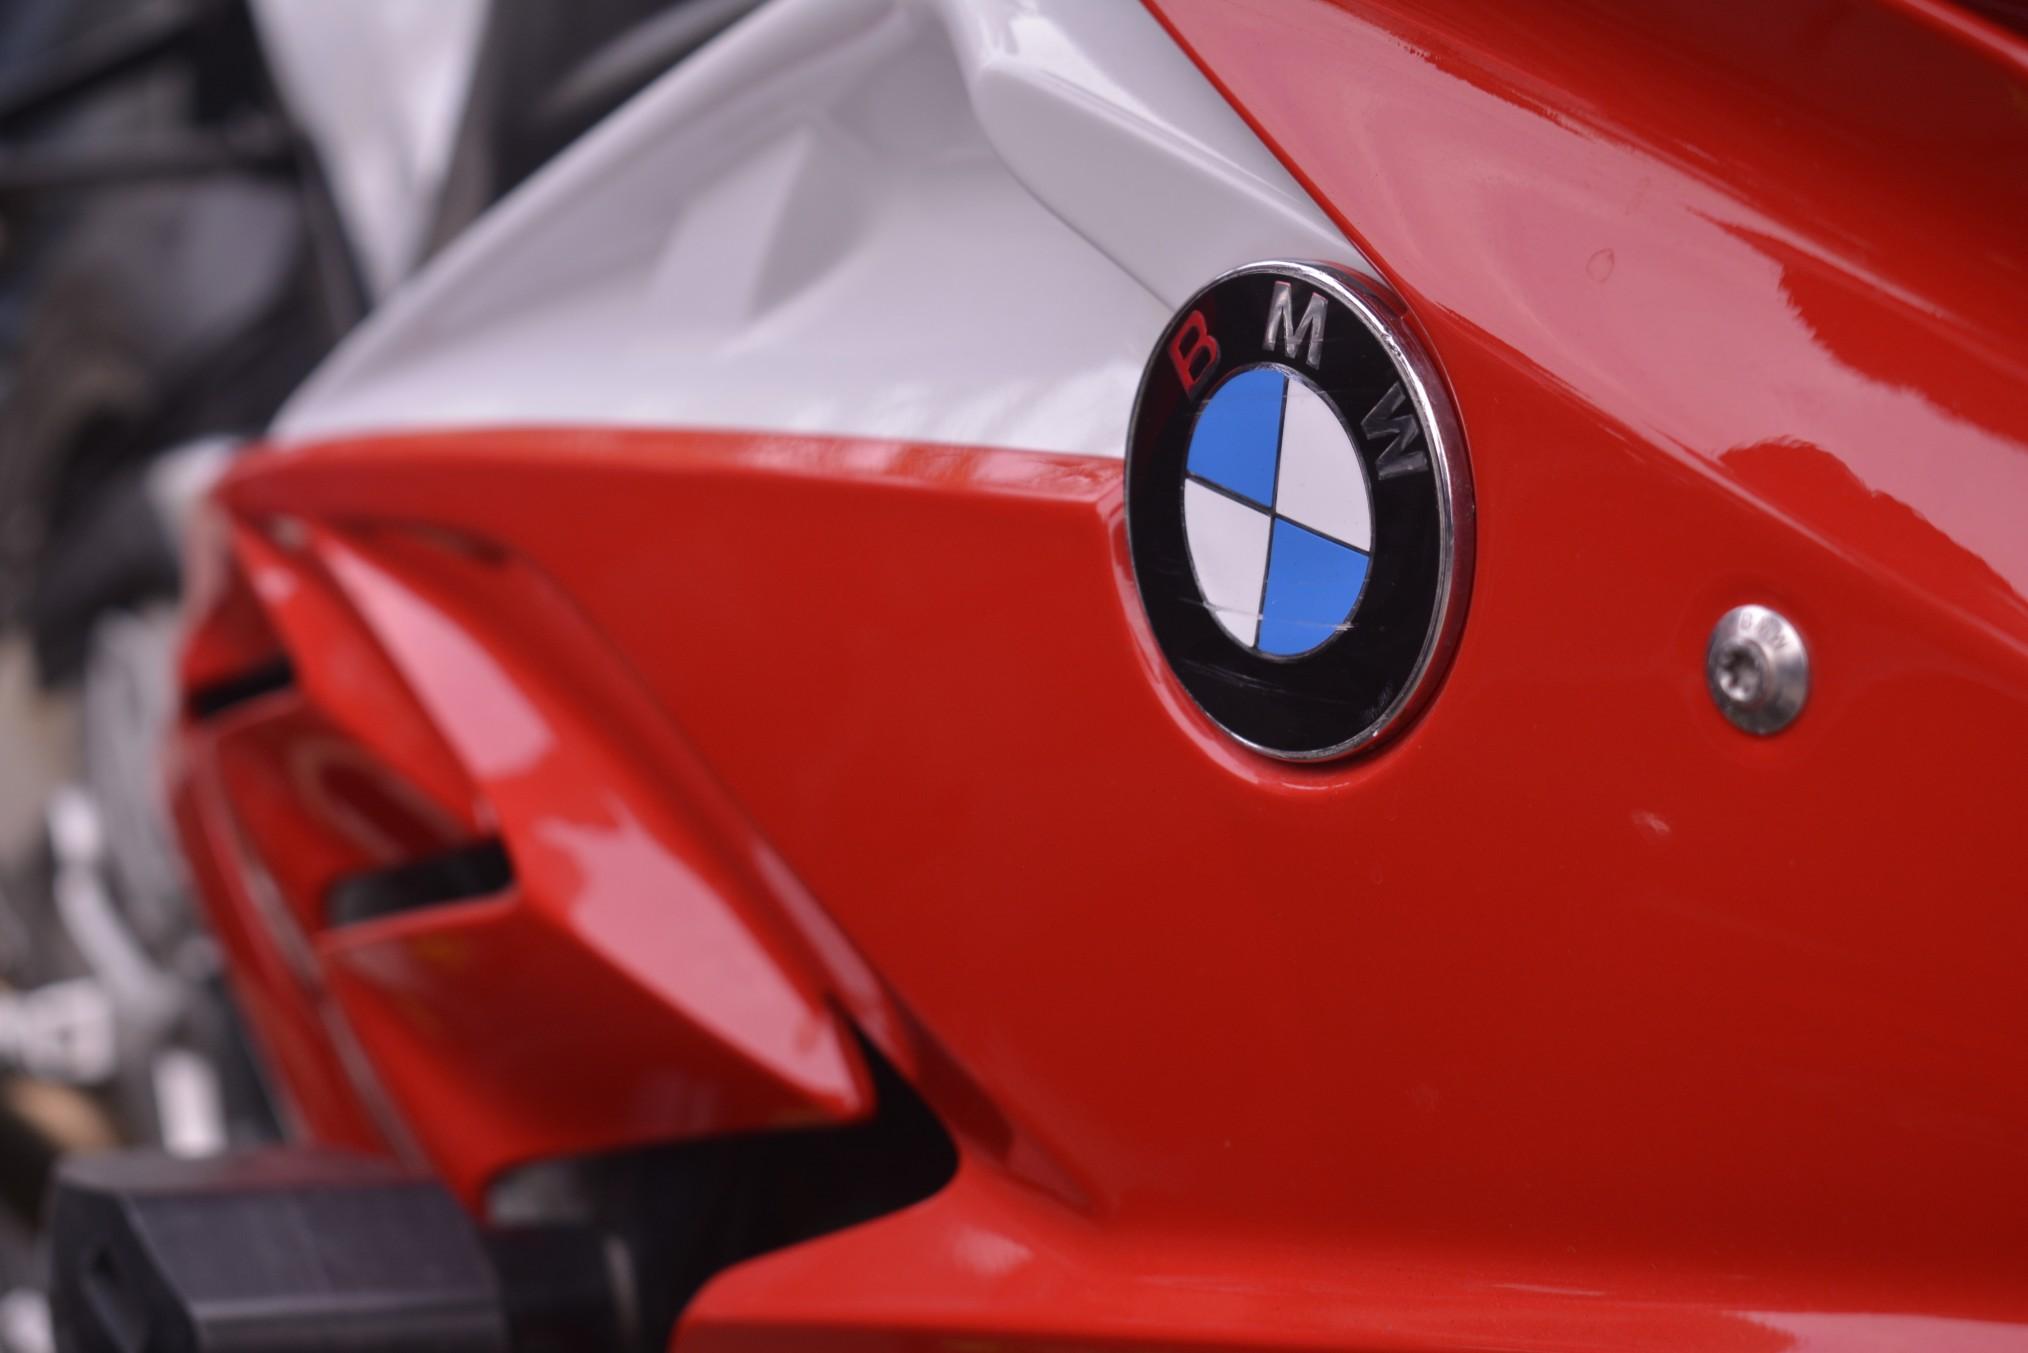 BMW has been racing towards the future for quite some time.